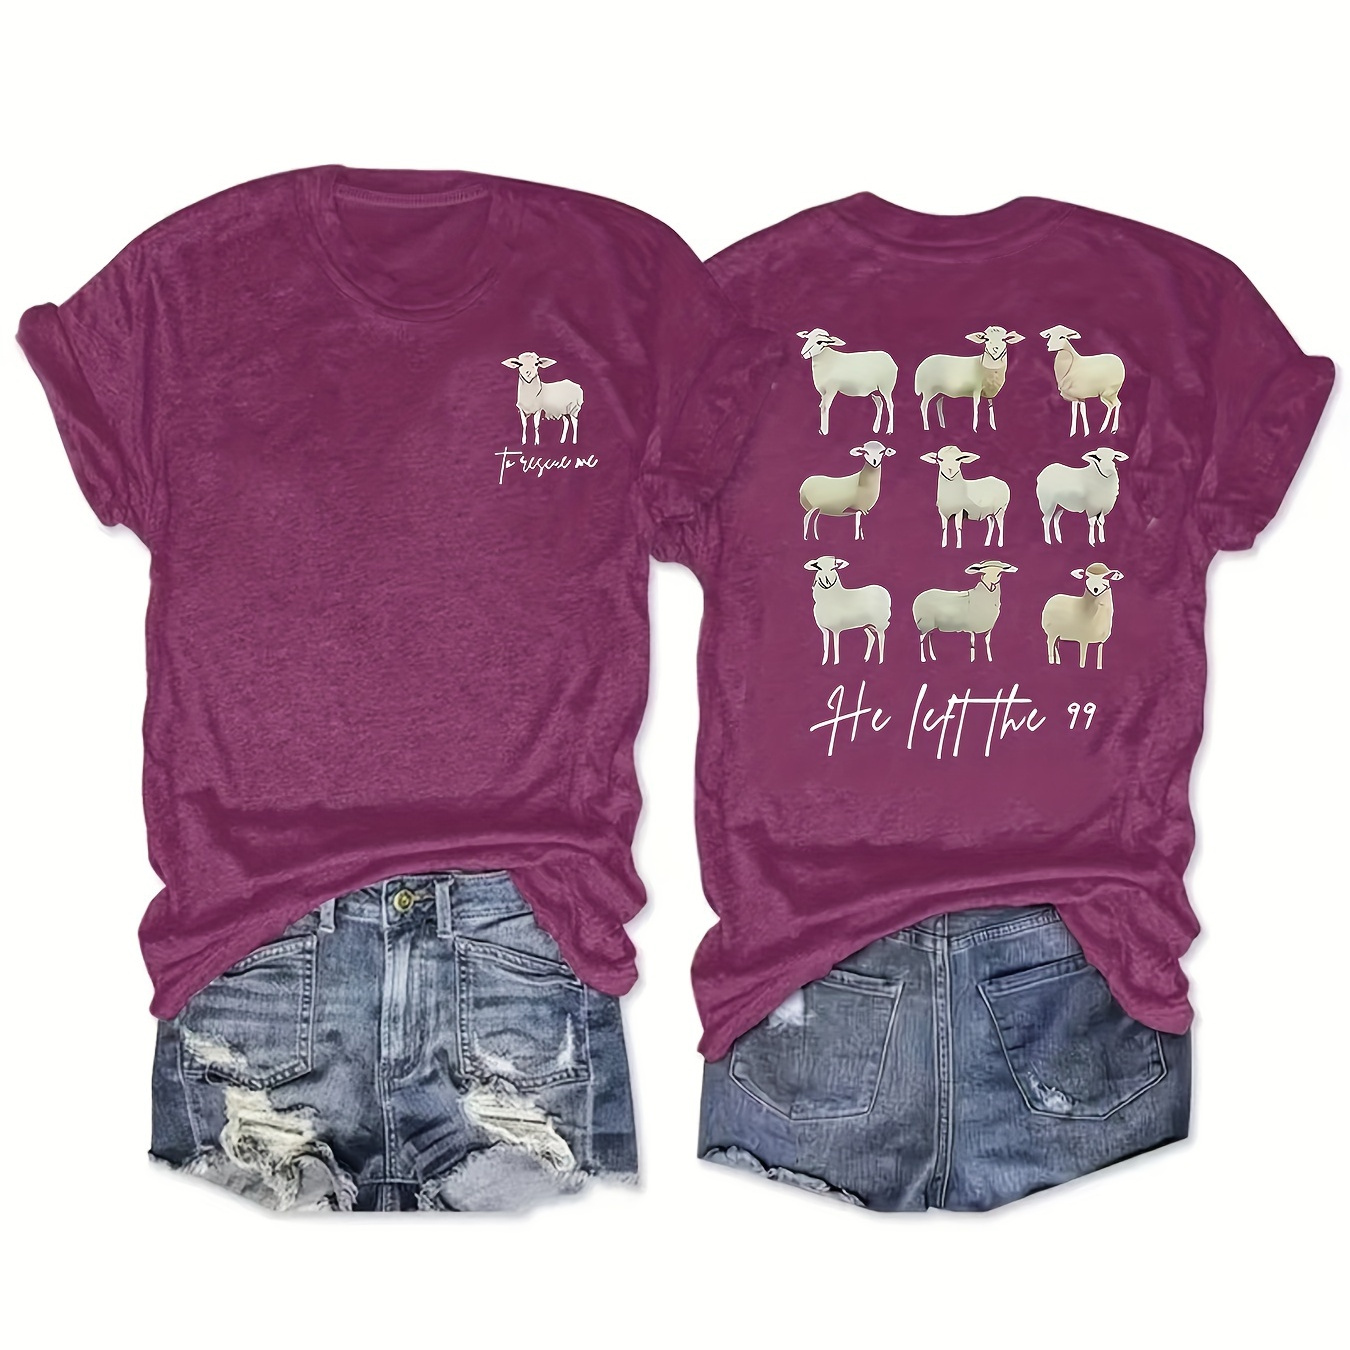 

Sheep Print Crew Neck T-shirt, Casual Short Sleeve Top For Spring & Summer, Women's Clothing